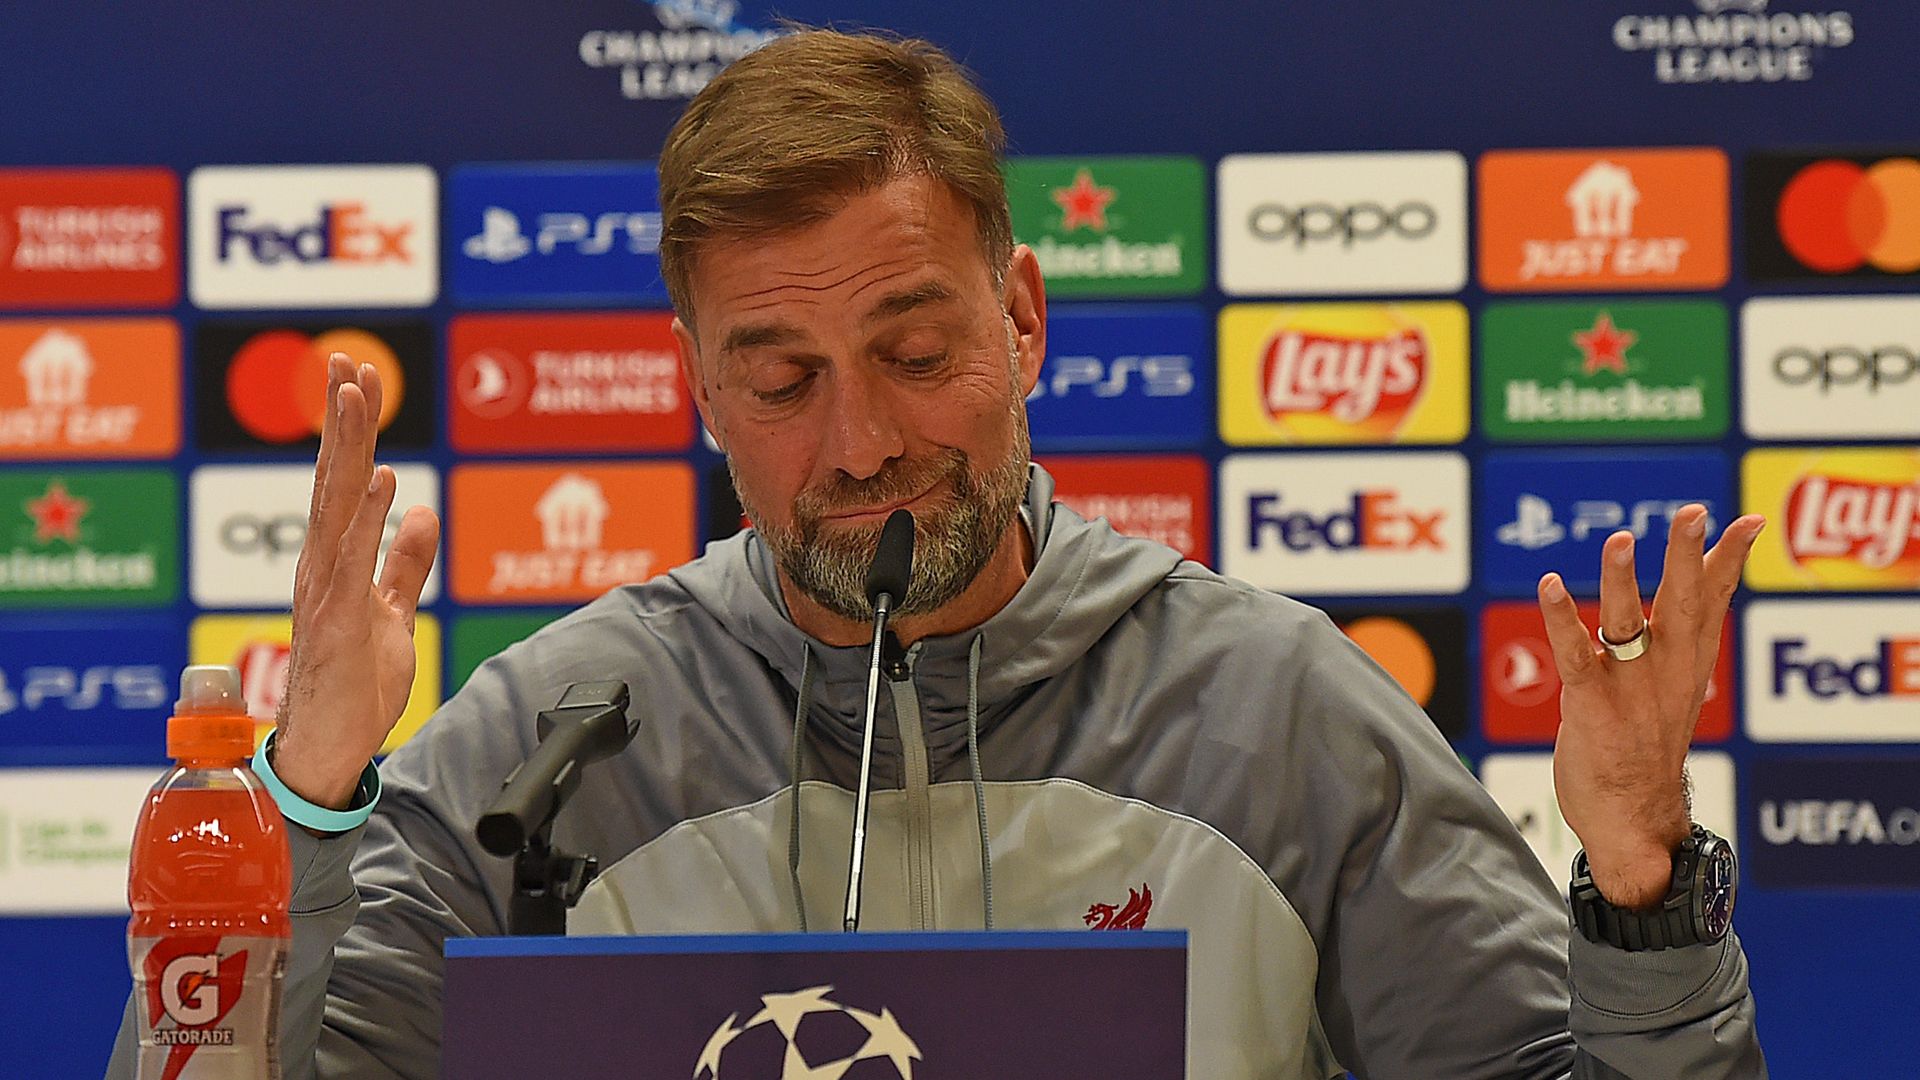 Klopp: 'A one per cent chance at Bernabeu? We give it a try'